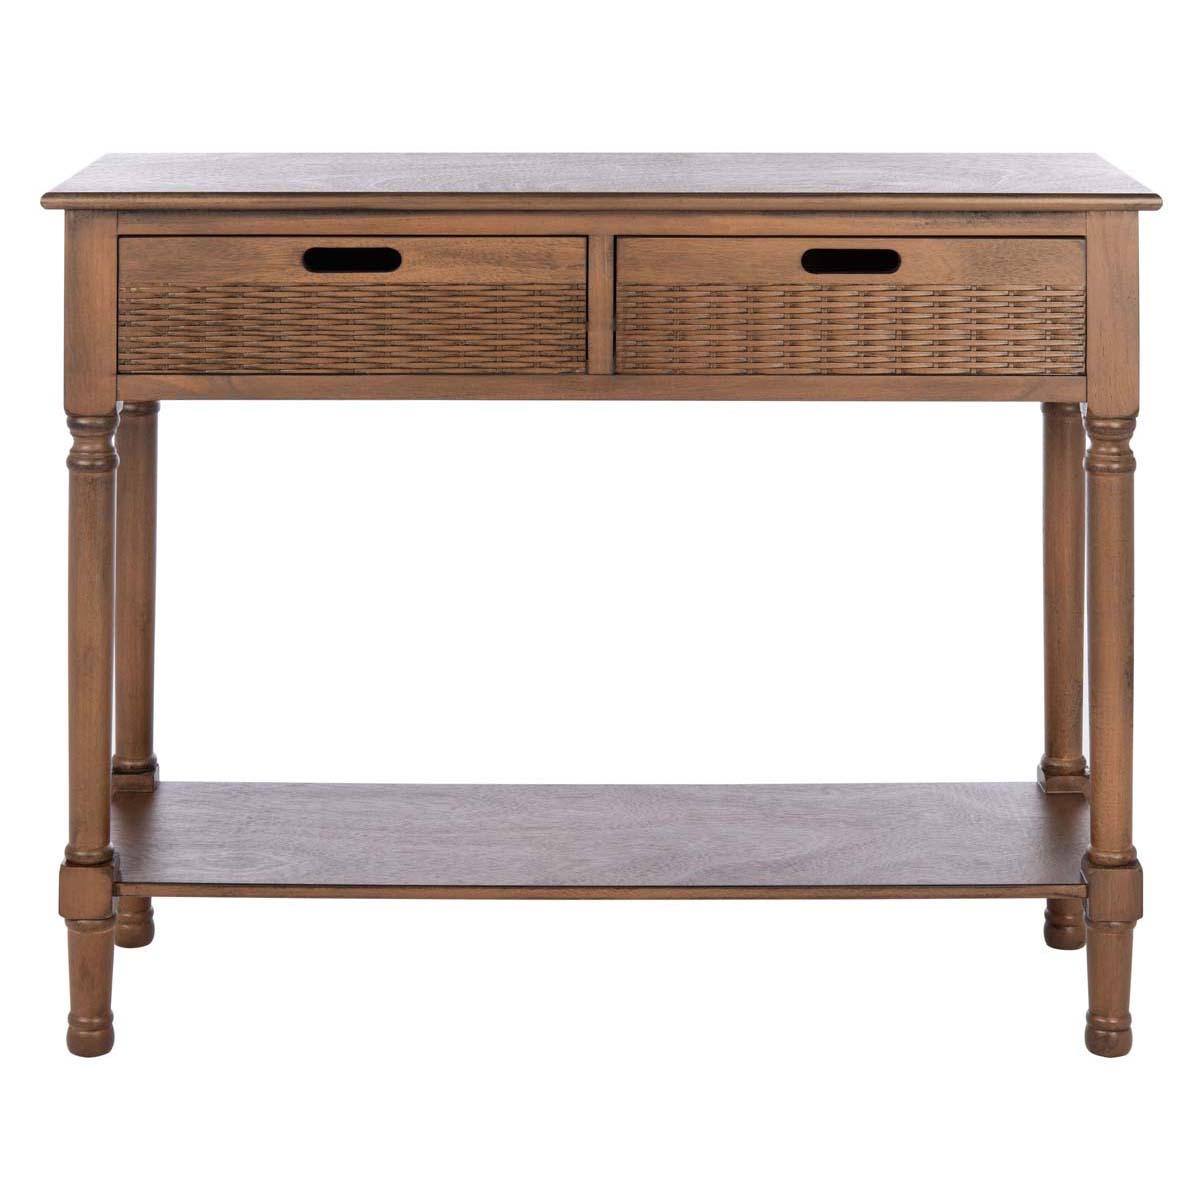 Safavieh Landers 2 Drawer Console, CNS5710 - Brown